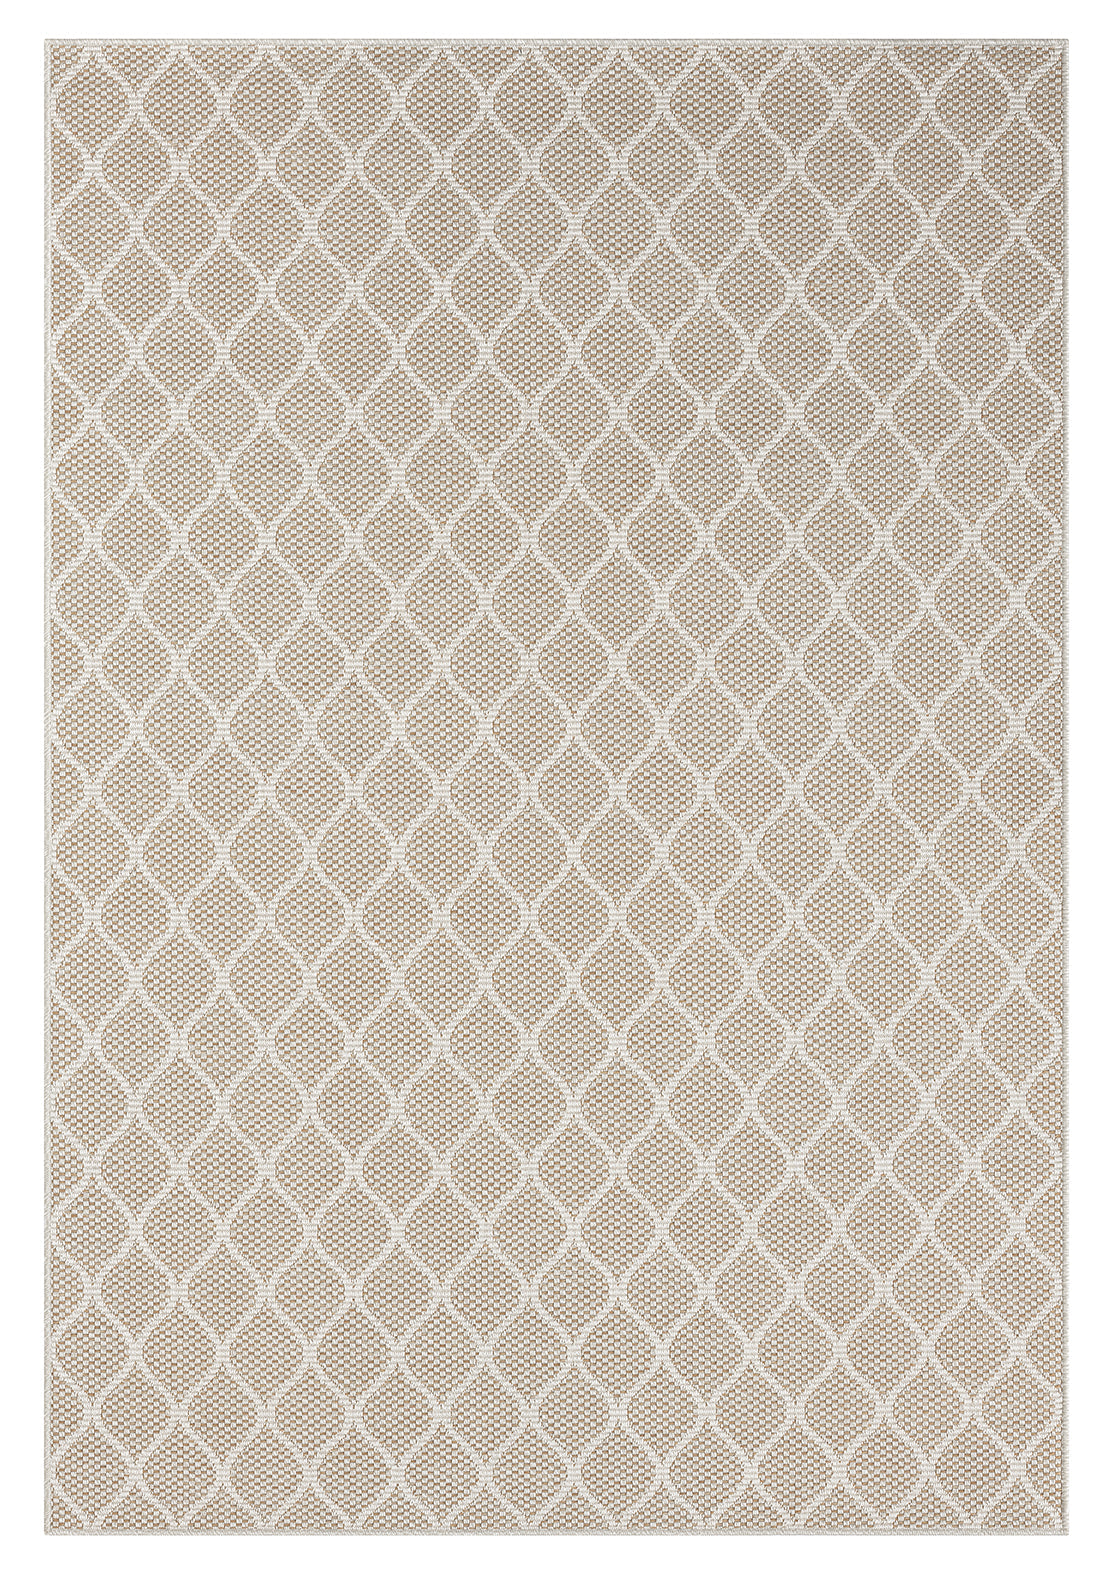 Durable Outdoor Rug | Style #TOV 303 - Crafted from 100% Polypropylene